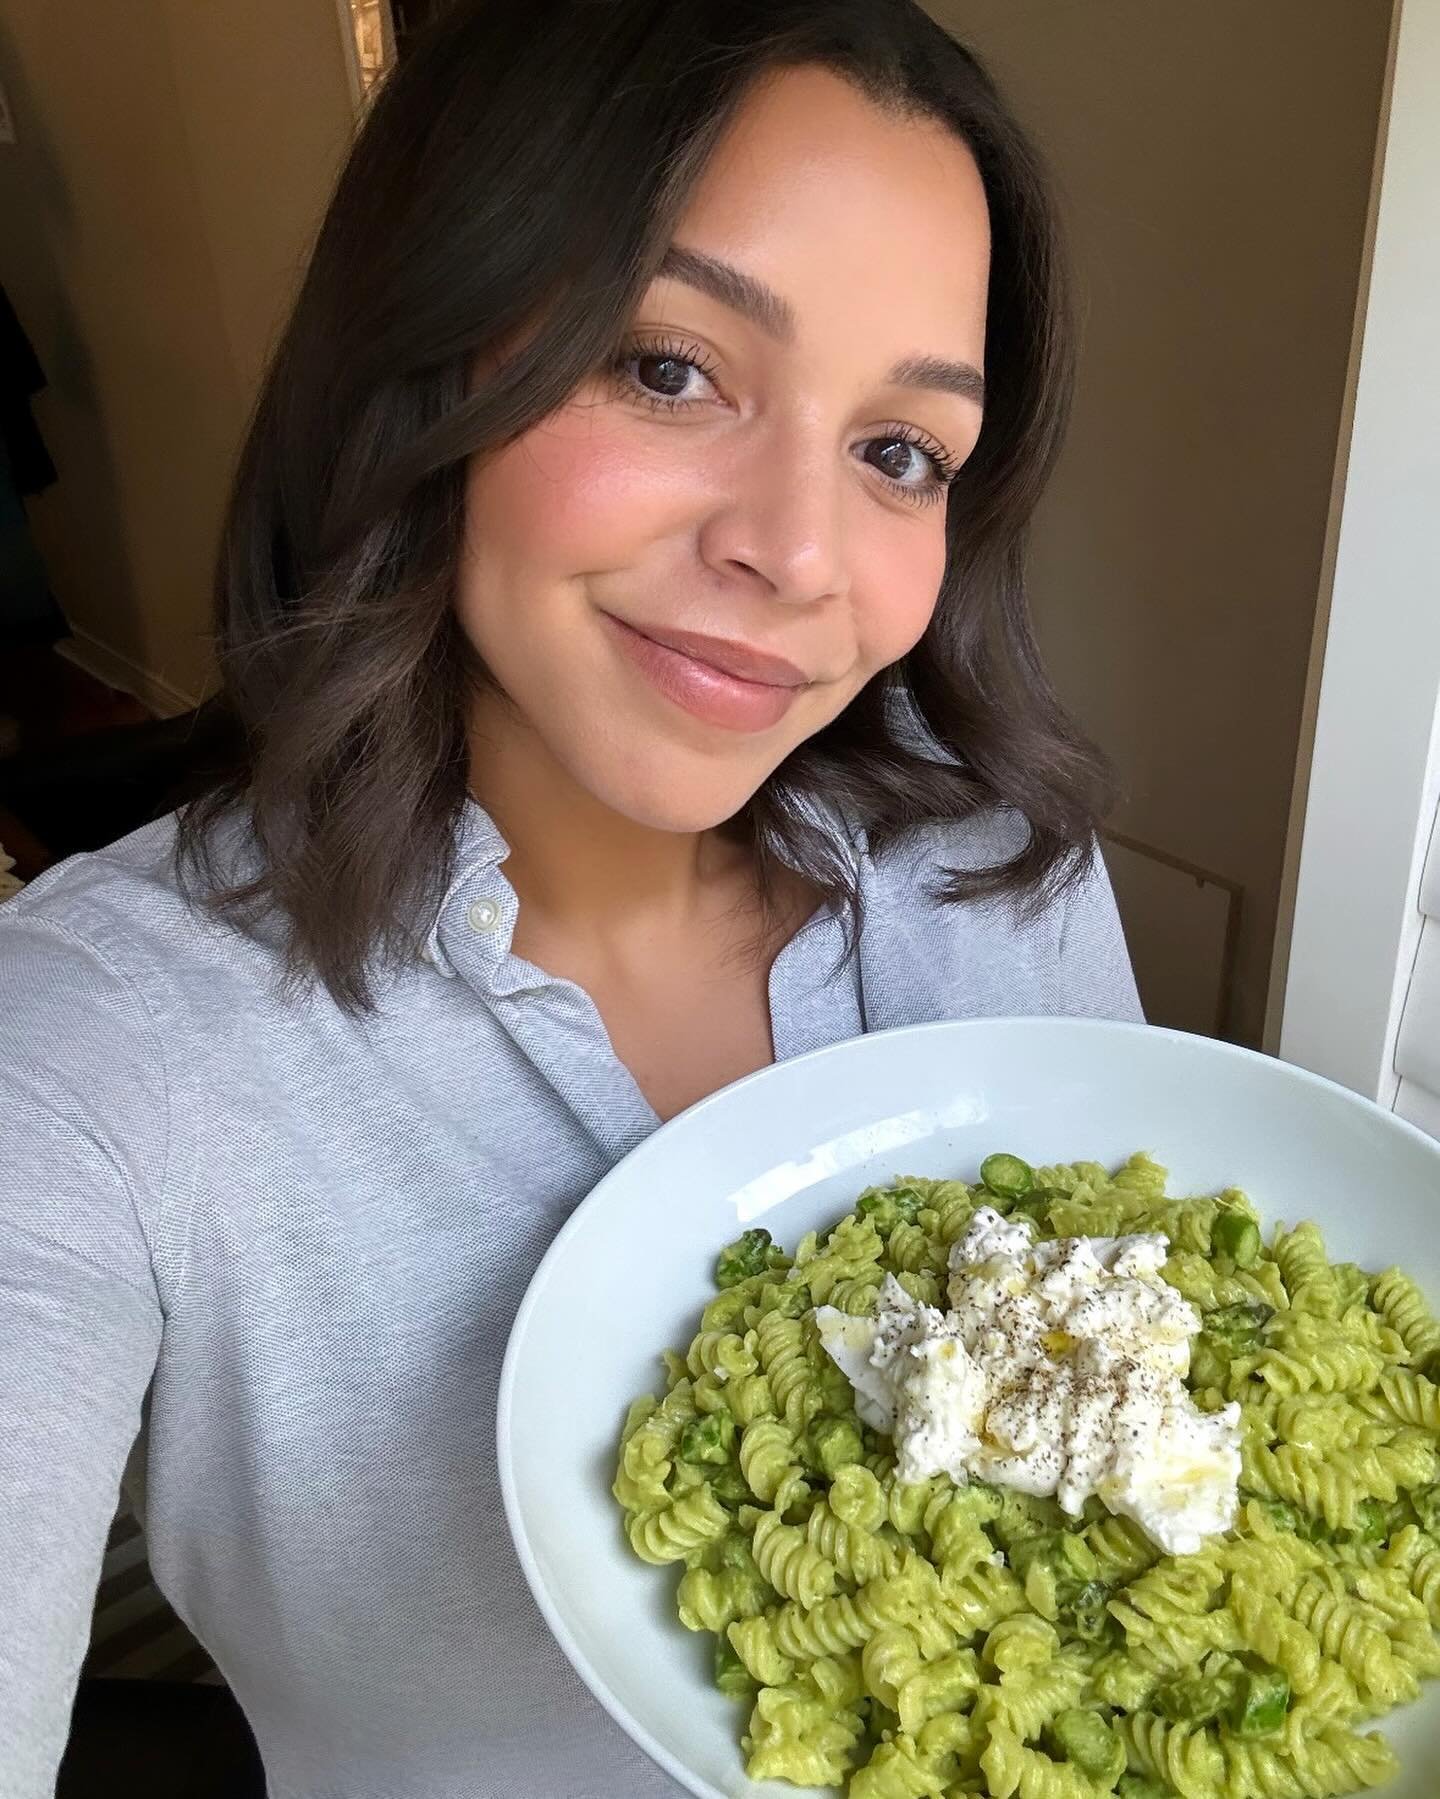 Omg &mdash; it&rsquo;s AN ACTUAL RECIPE!! I made this super easy creamy asparagus pasta tonight and it was so delicious that I immediately wrote it down. I&rsquo;m begging you to try this while asparagus is still in season. It&rsquo;s so easy and you